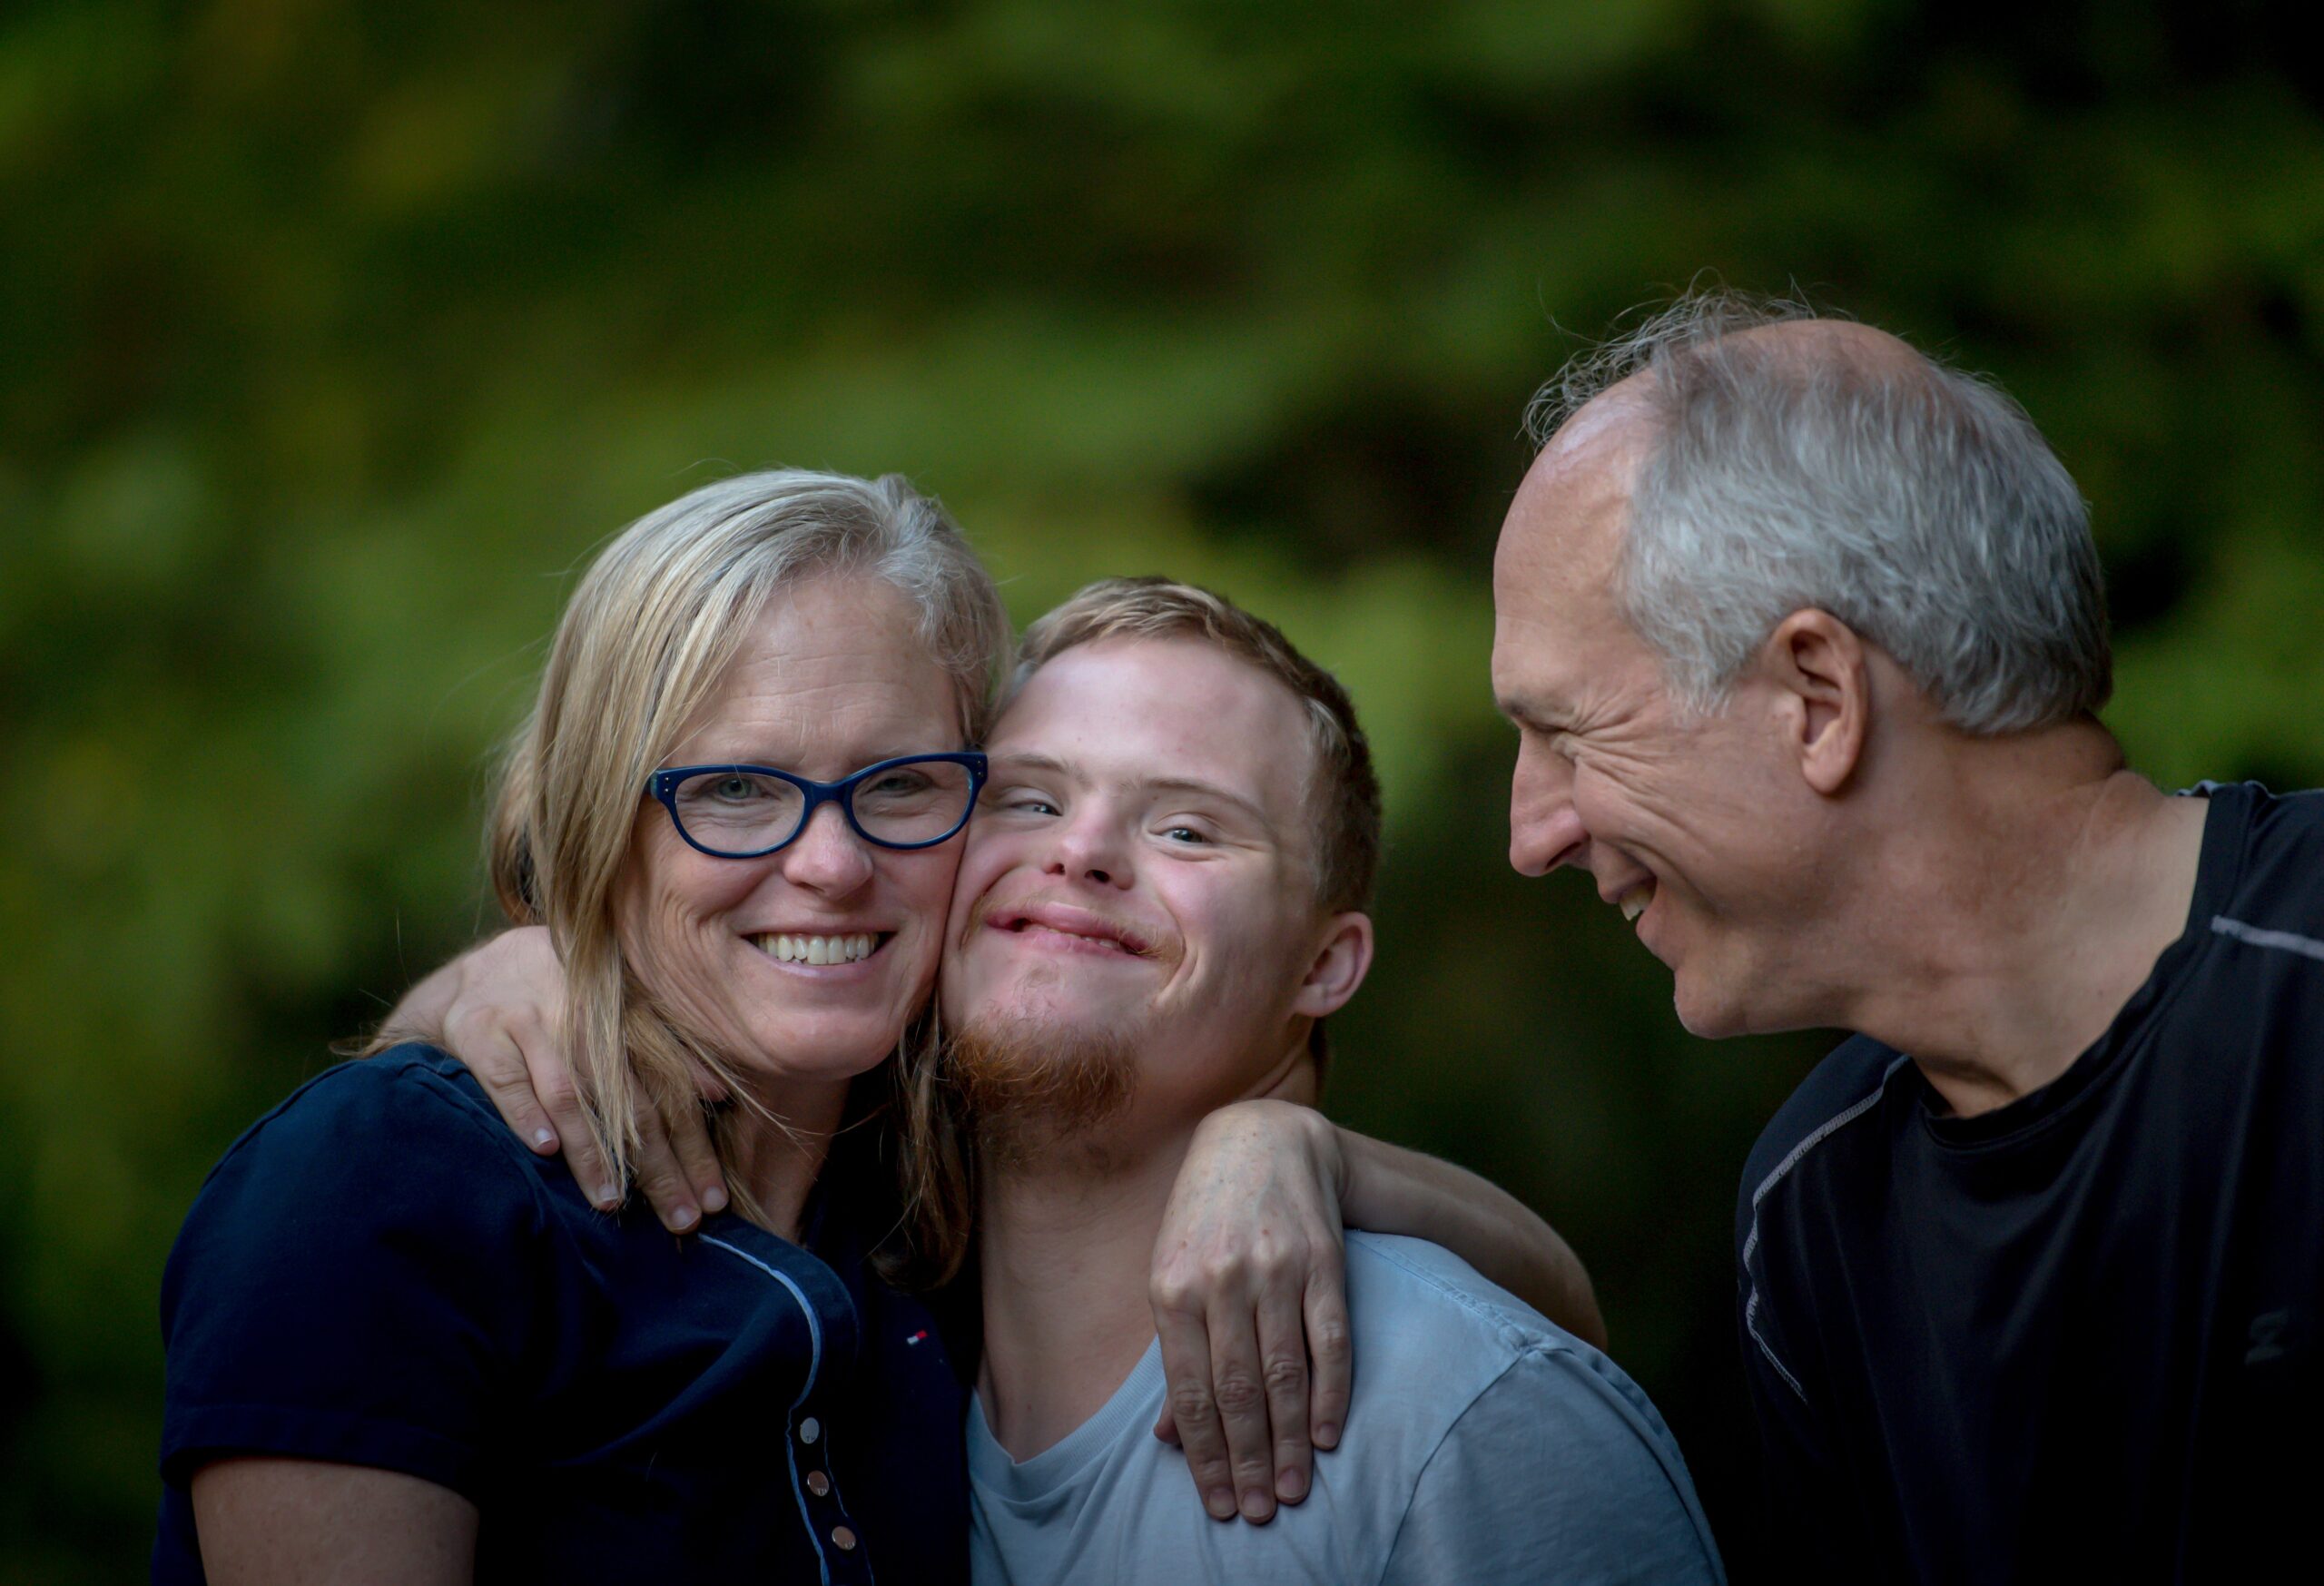 parents smiling and embracing their son with down syndrome